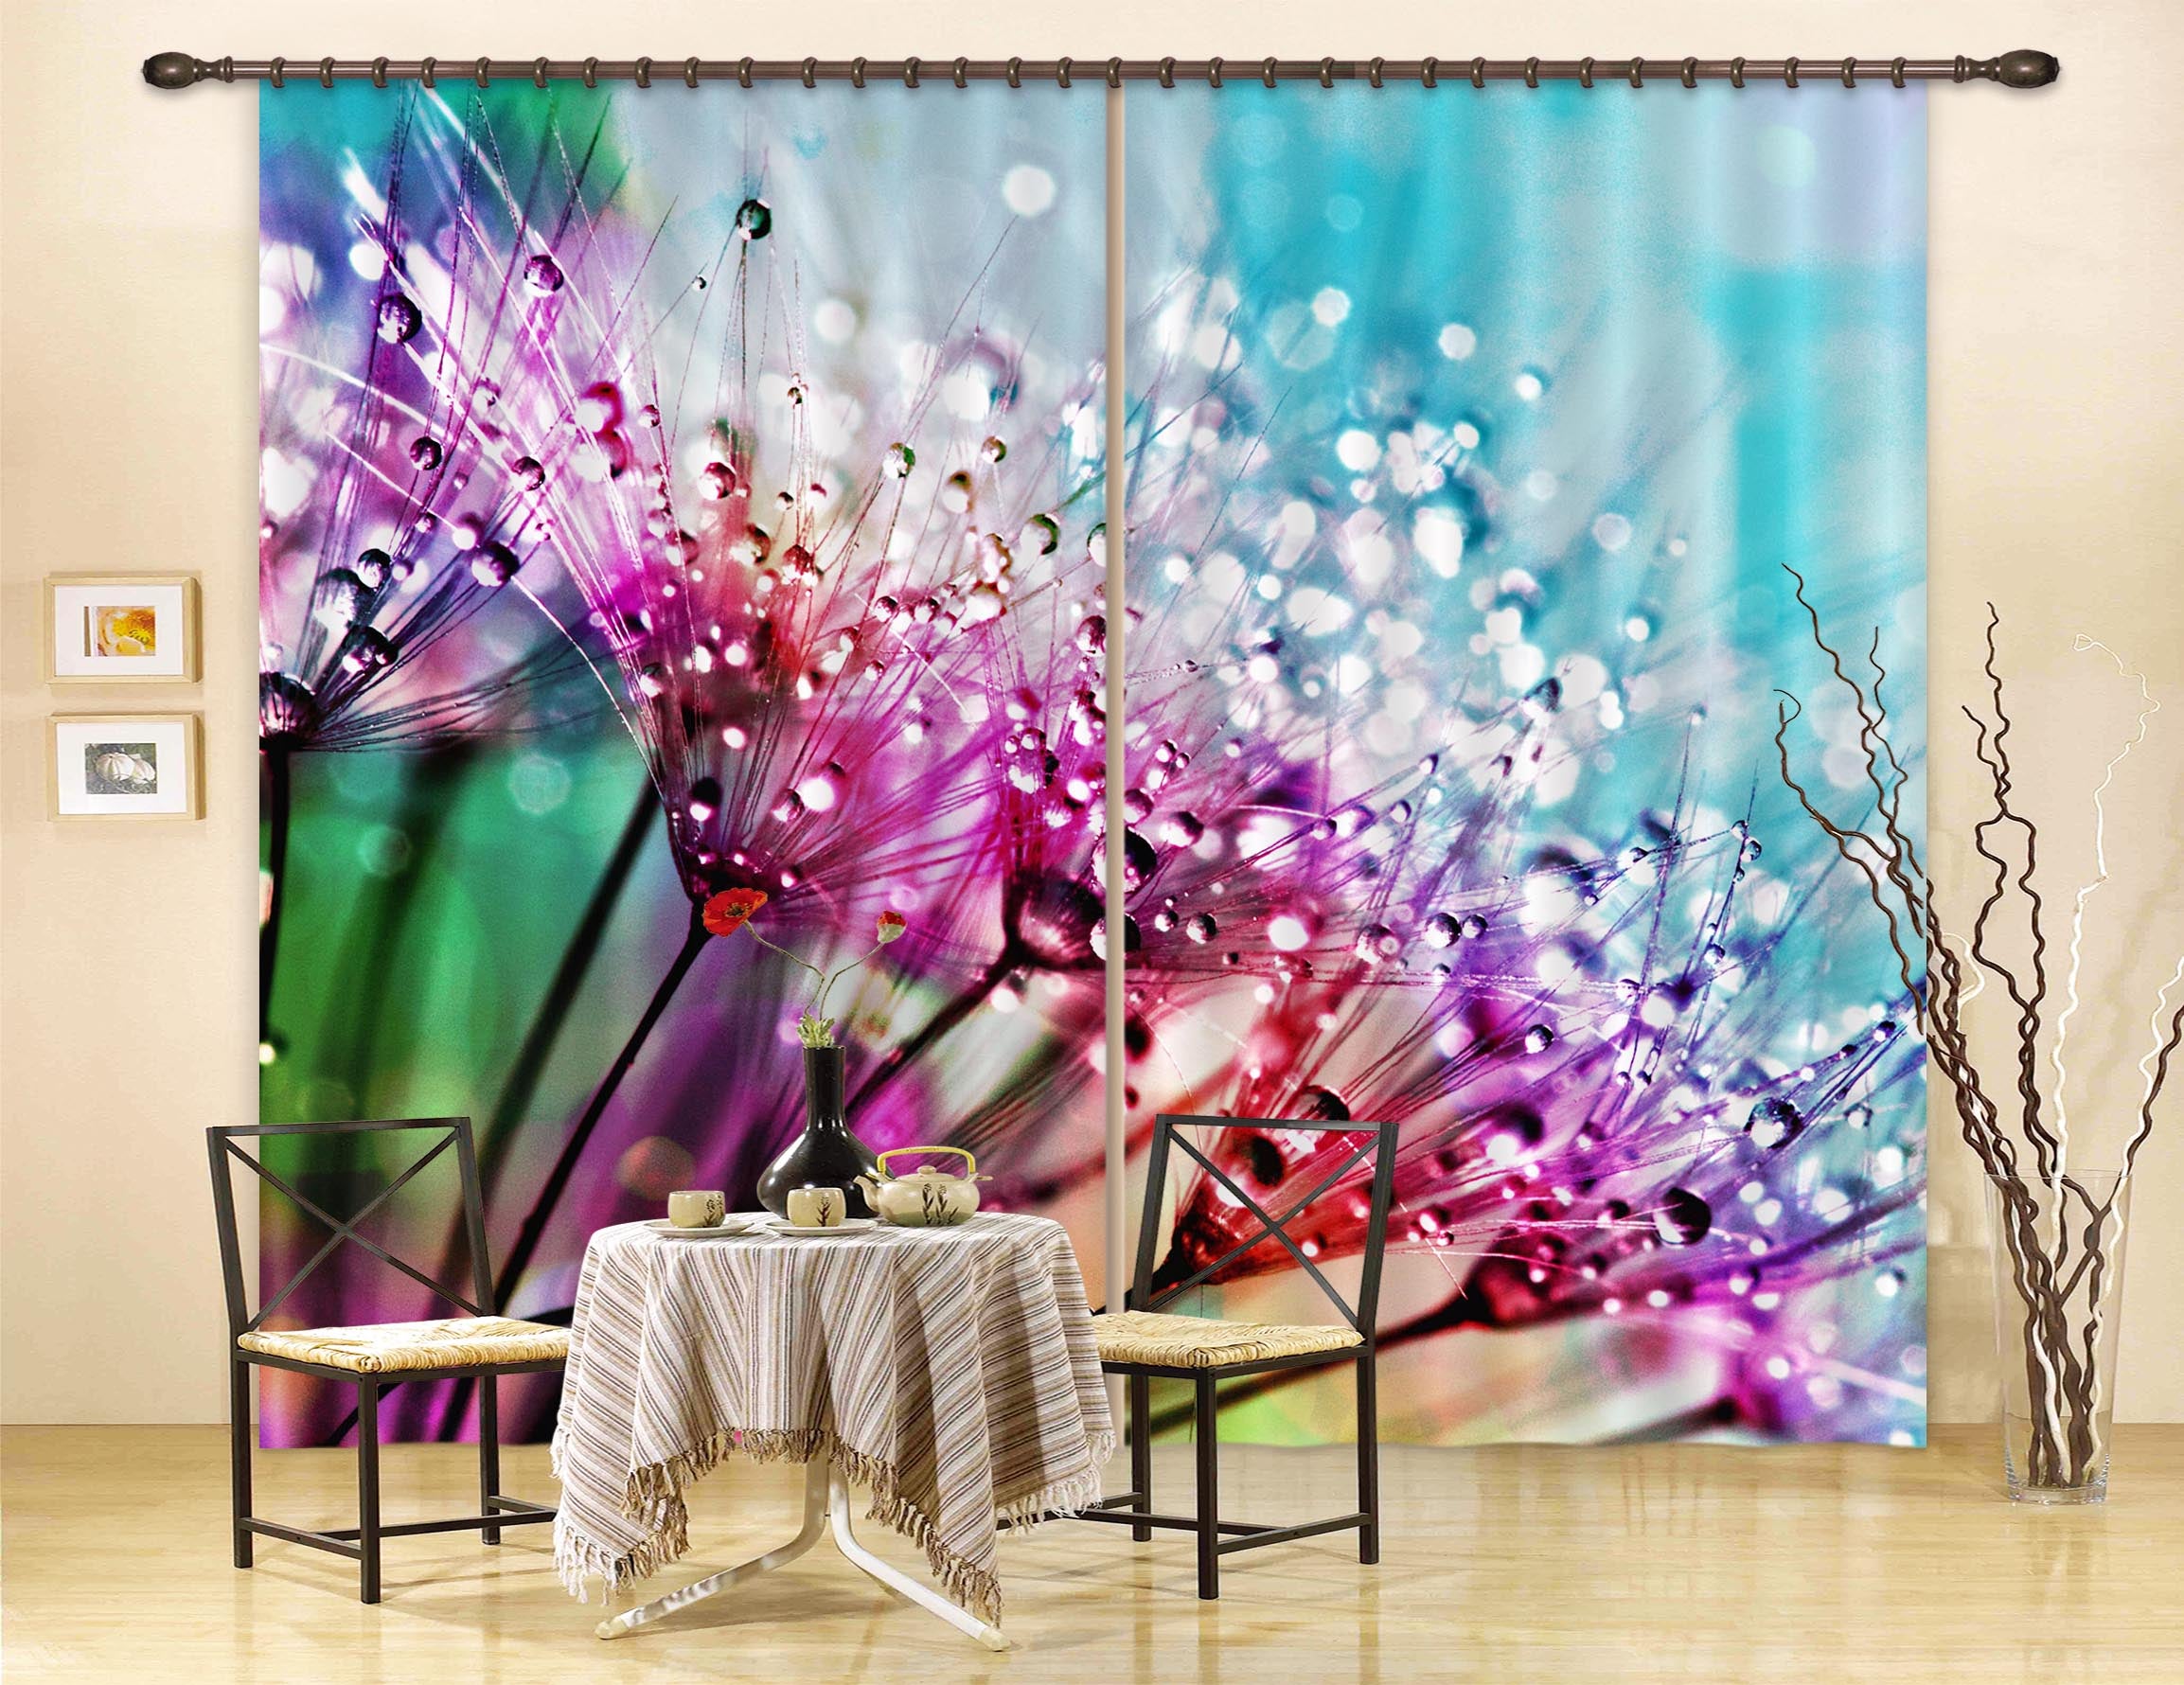 3D Morning Dew 829 Curtains Drapes